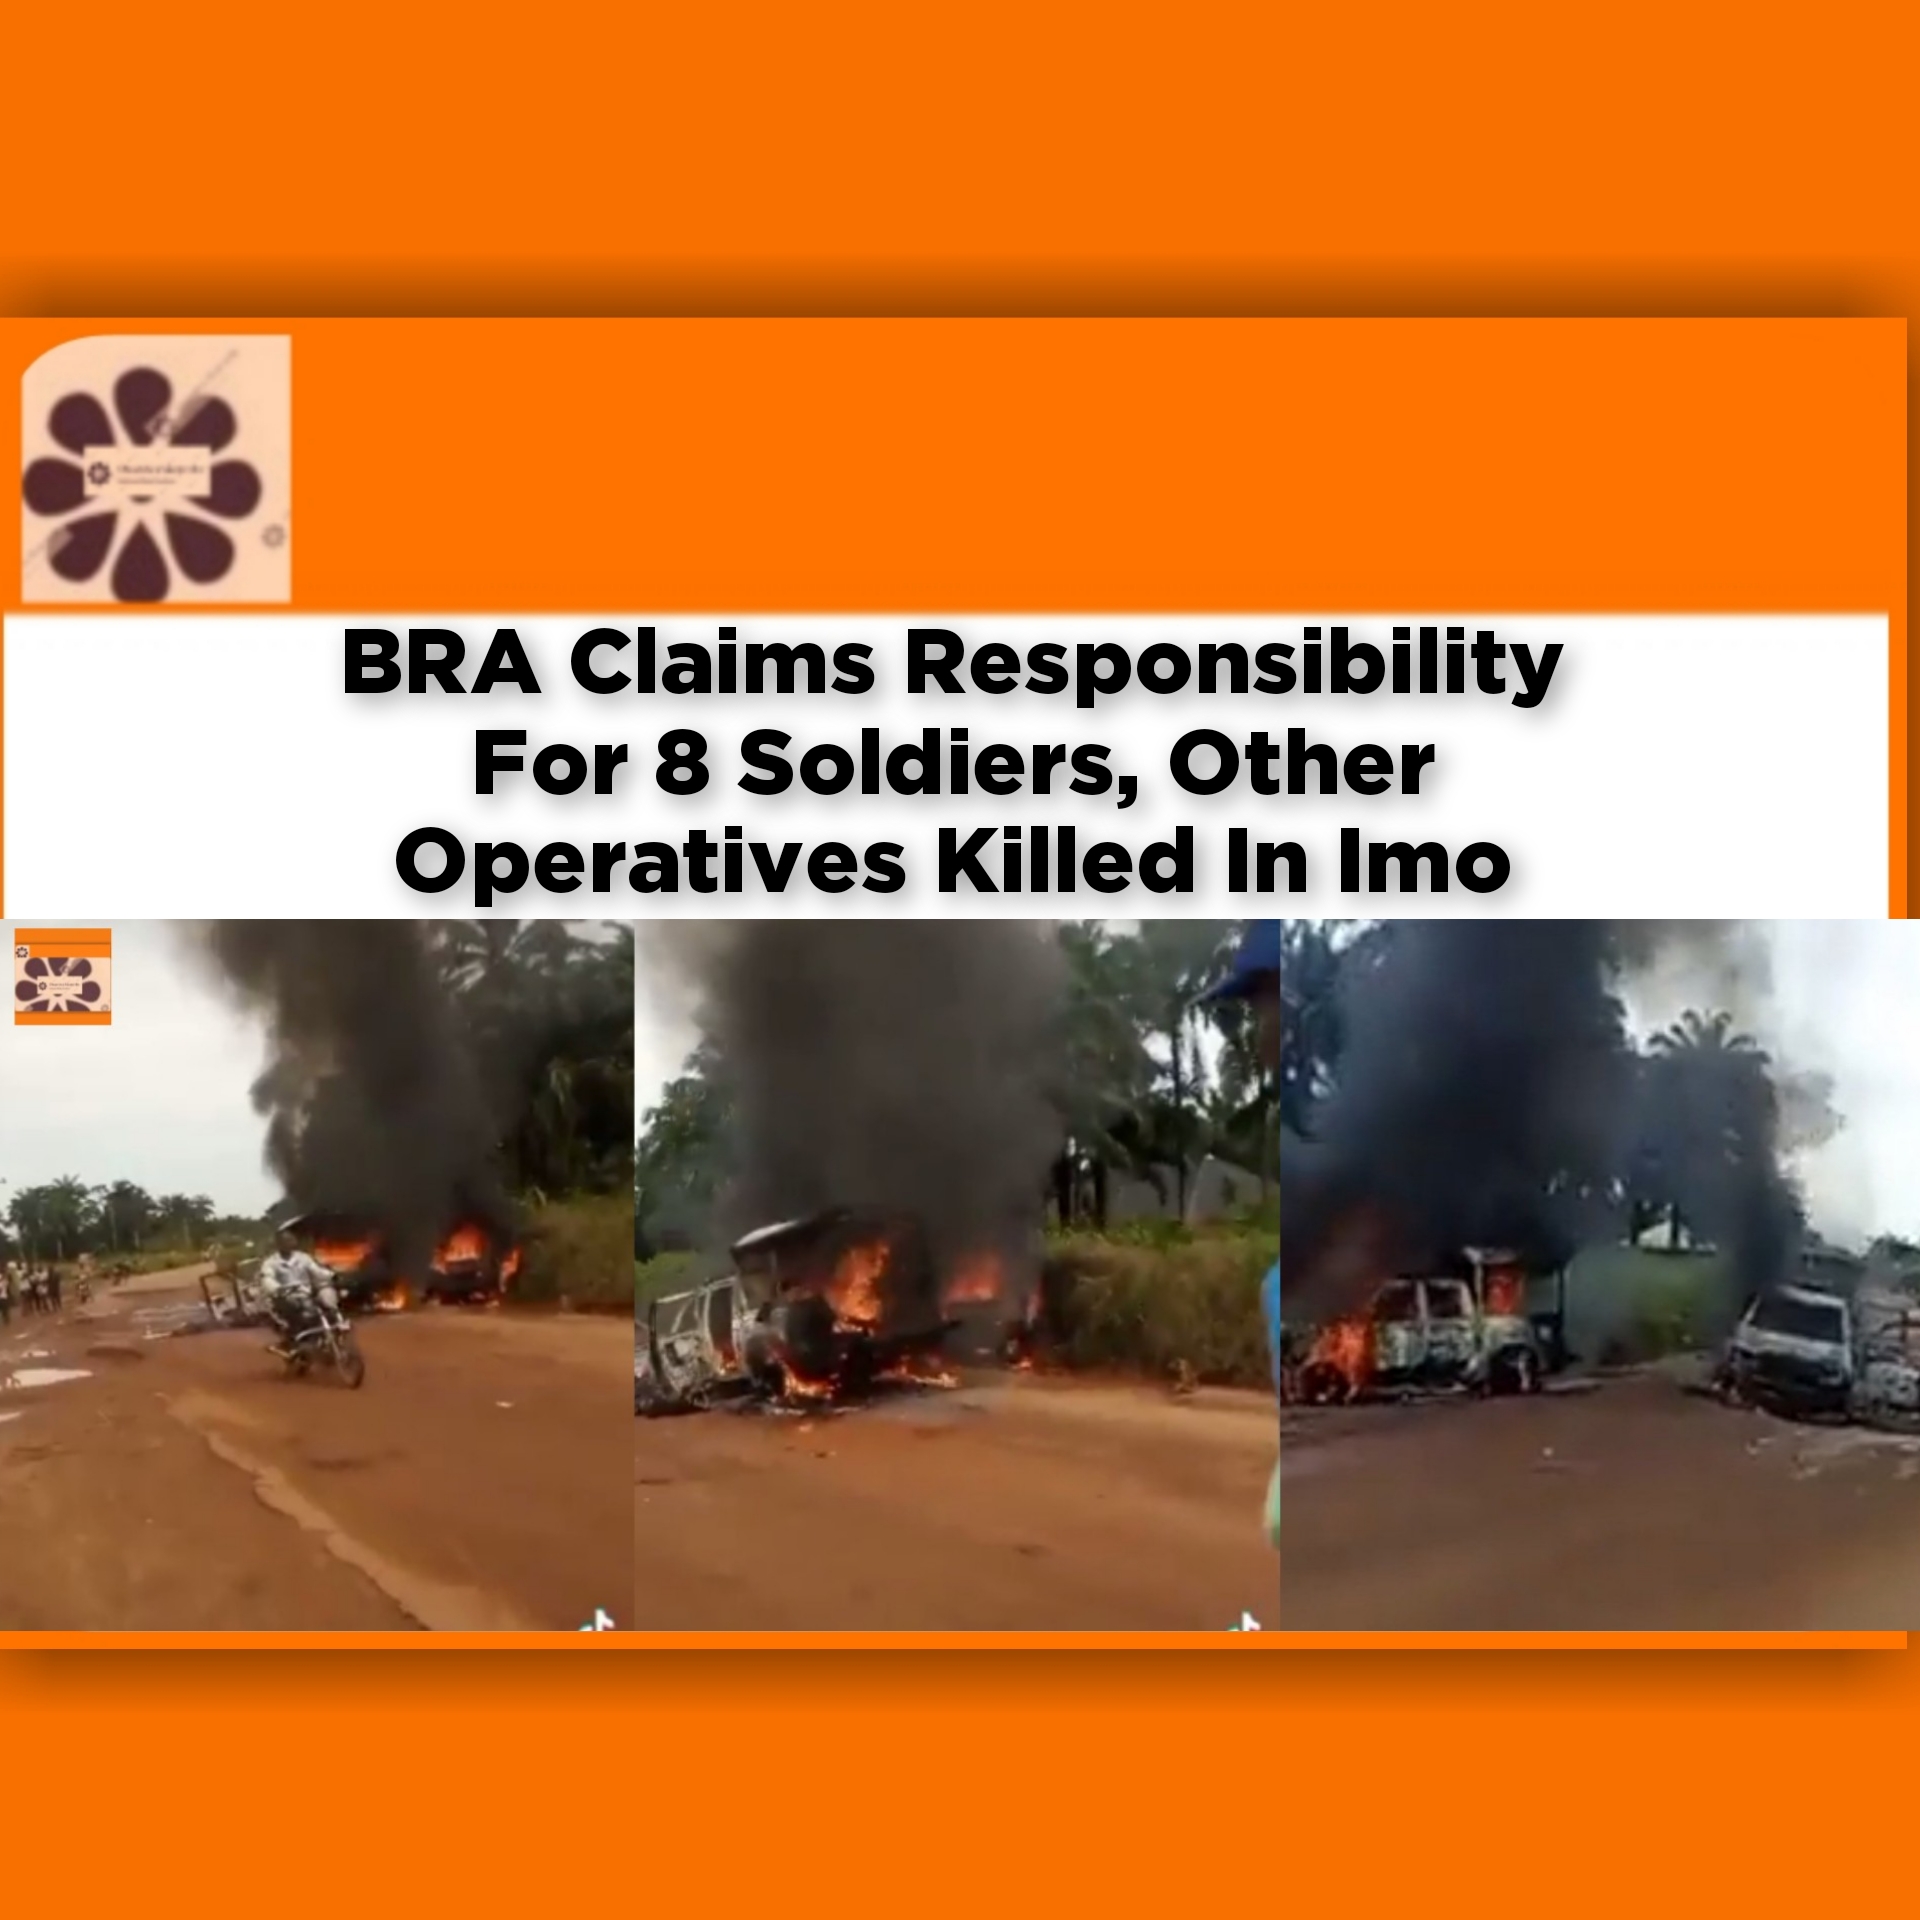 BRA Claims Responsibility For 8 Soldiers, Other Operatives Killed In Imo ~ OsazuwaAkonedo #Obaseki